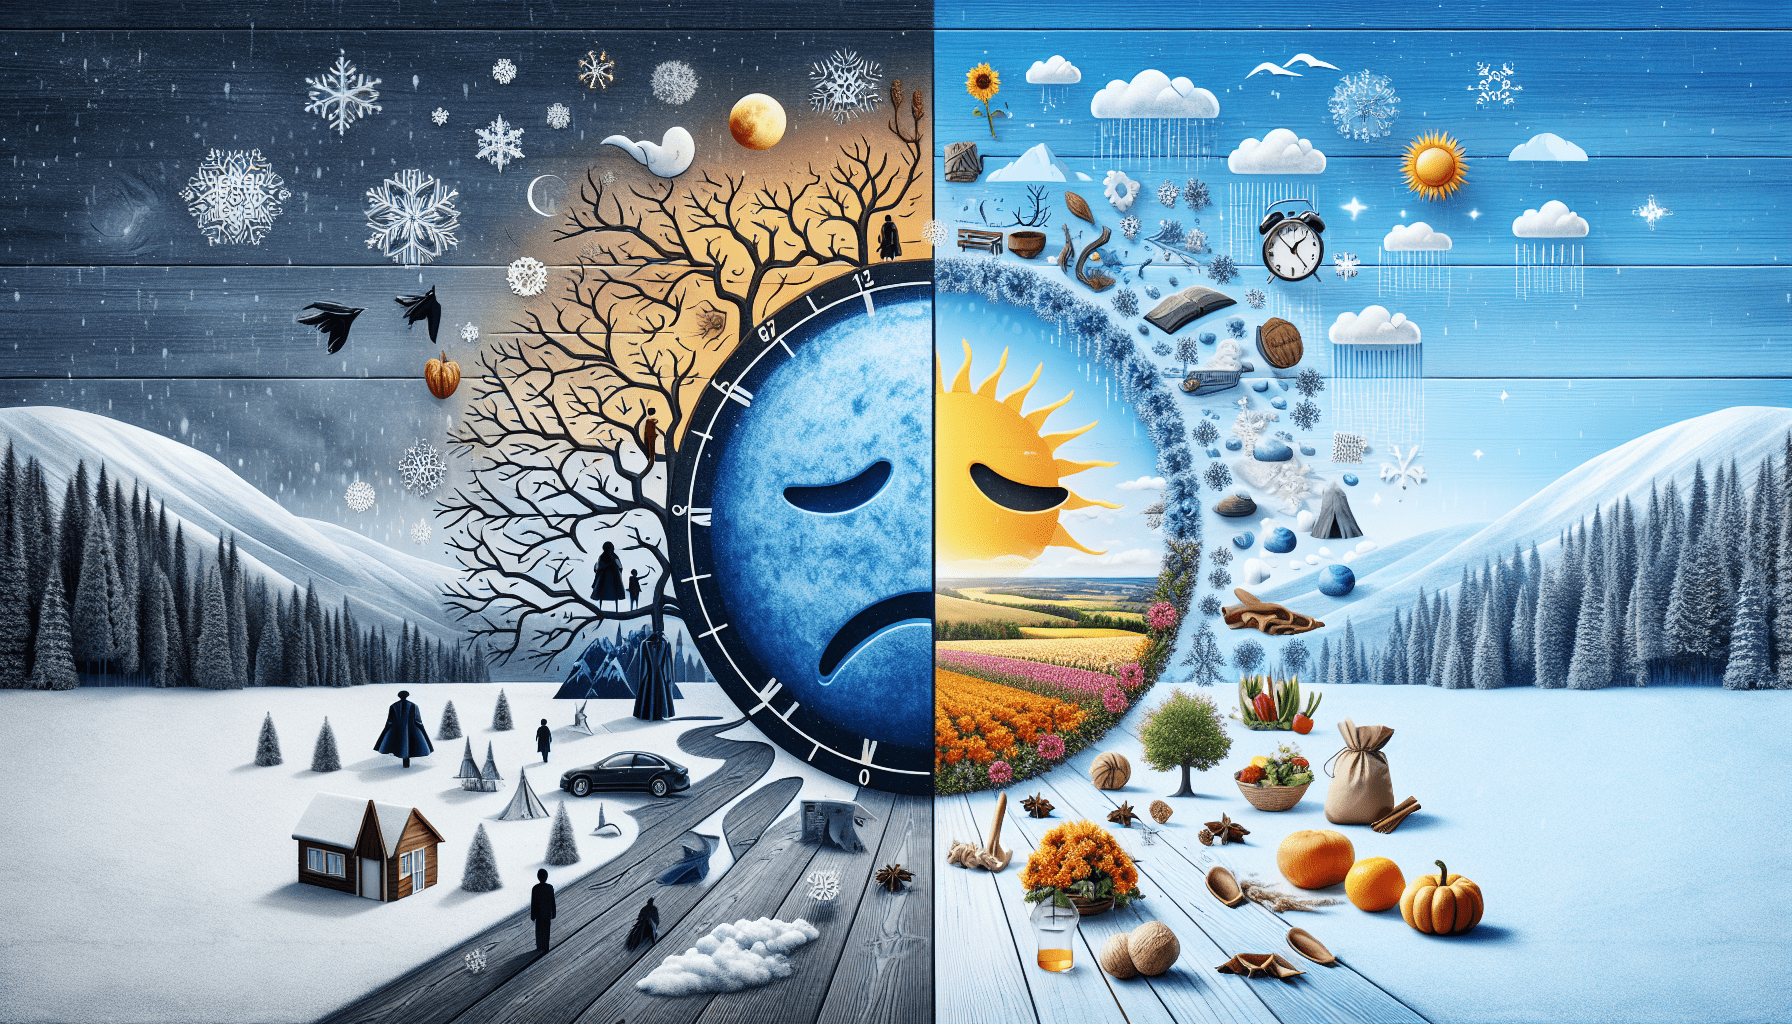 Digital illustration depicting a split scene: on the left, a wintry landscape with snow-covered trees and houses under a midnight blue sky featuring a large moon with facial features and a clock superimposed; on the right, a spring scene with a vibrant sun, flowering trees, and an agricultural landscape transitioning through various weather symbols and time elements like clocks and sun/cloud representations across a blue background.